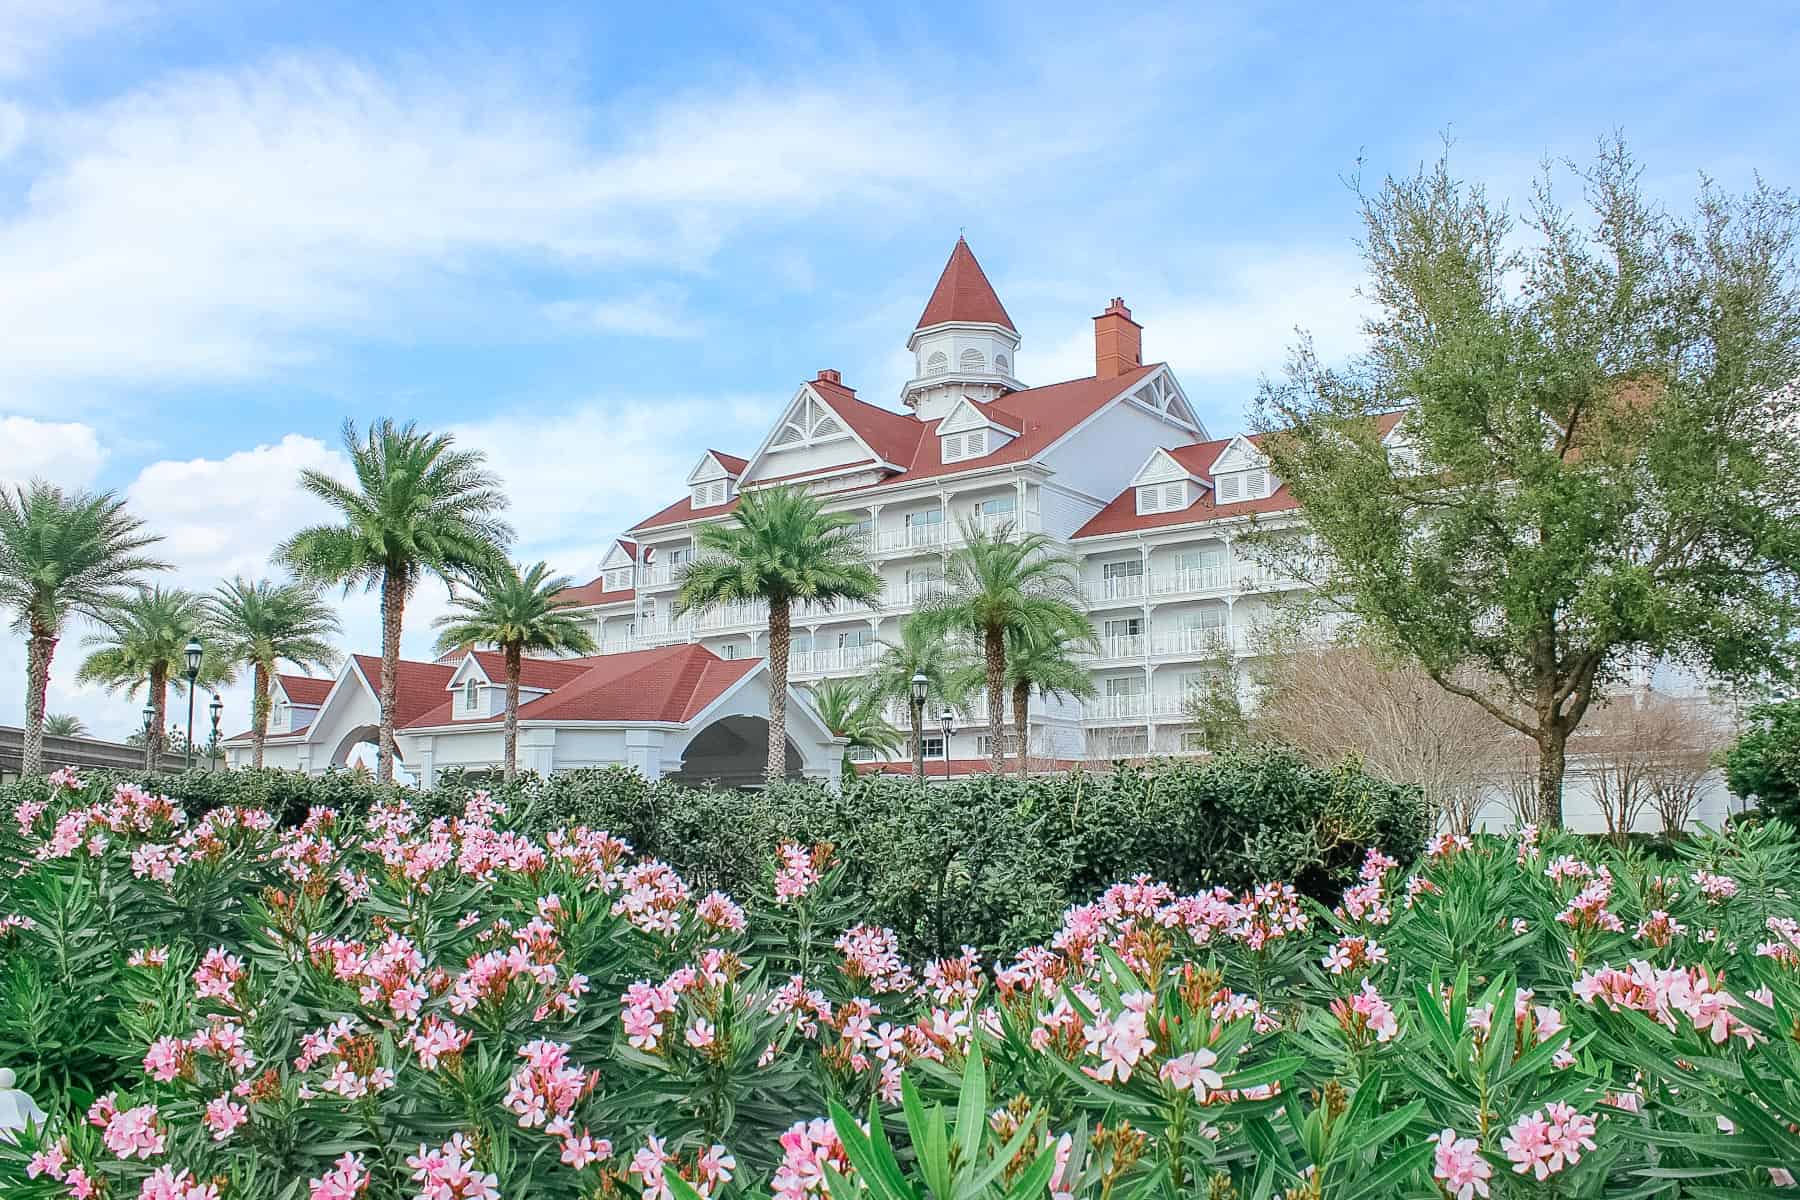 The Grand Floridian Villas building with pink flowers in bloom. 